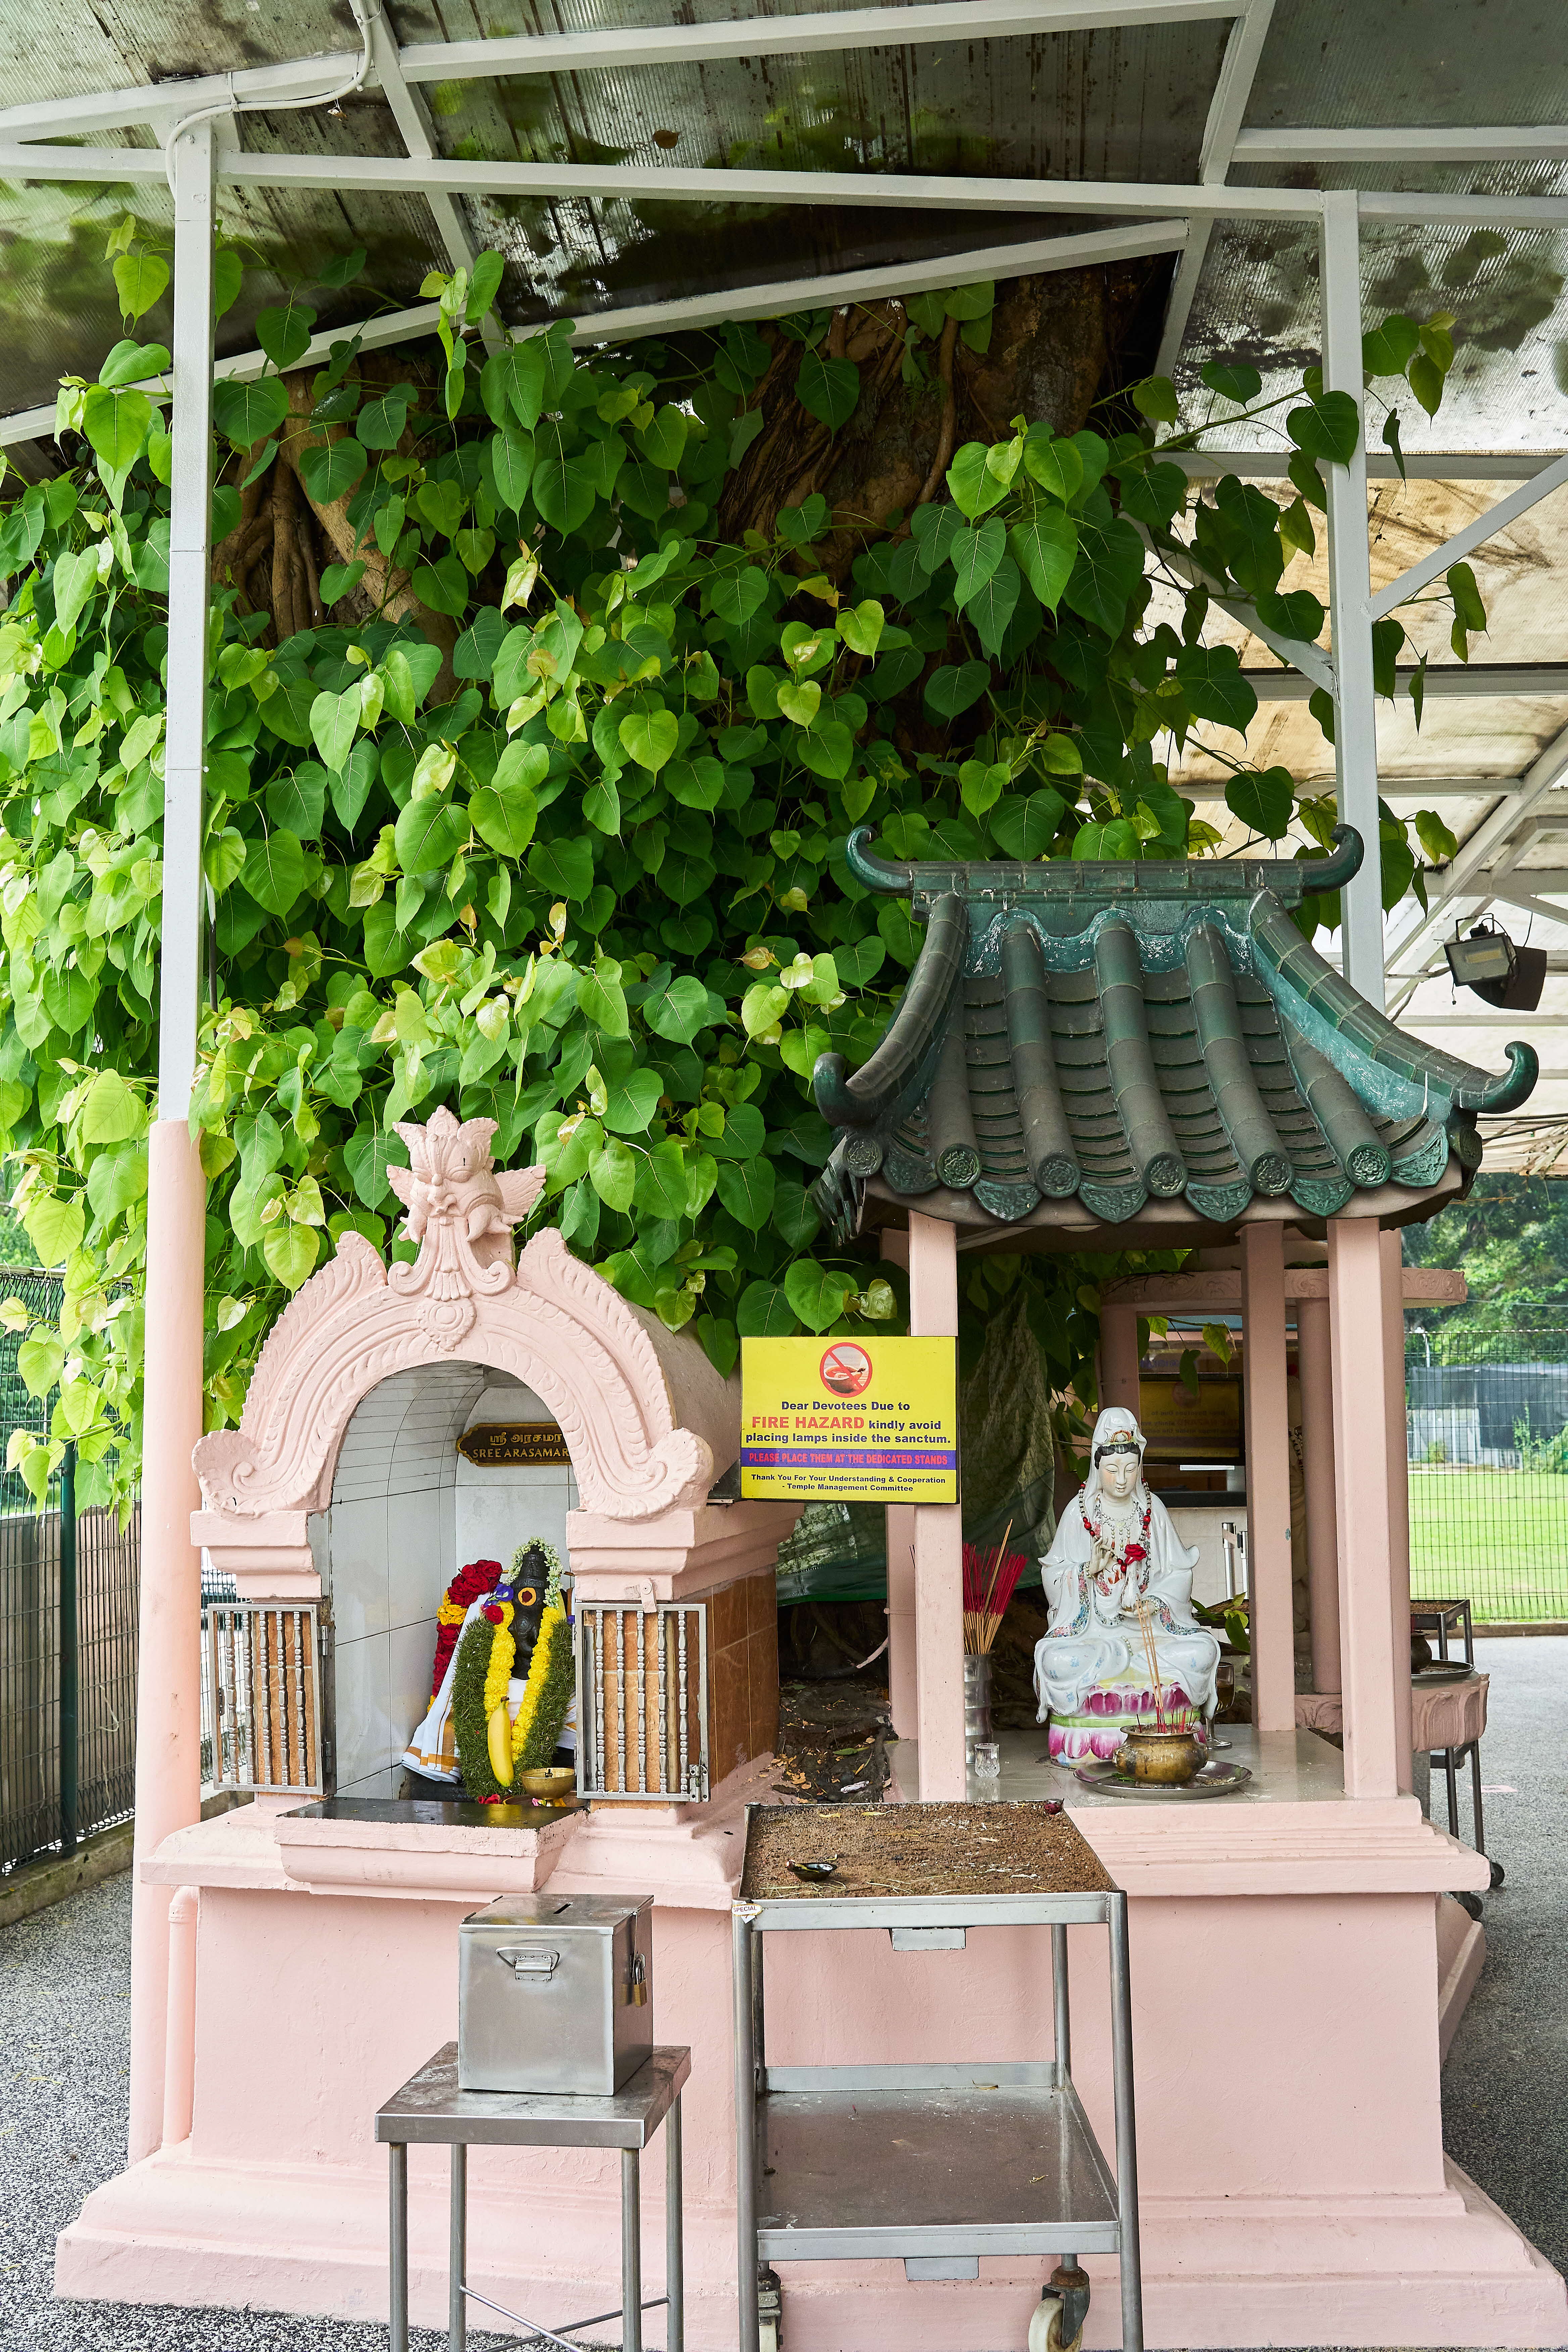 Shrines of non-Hindu deities Guan Yin and Buddha at the temple.